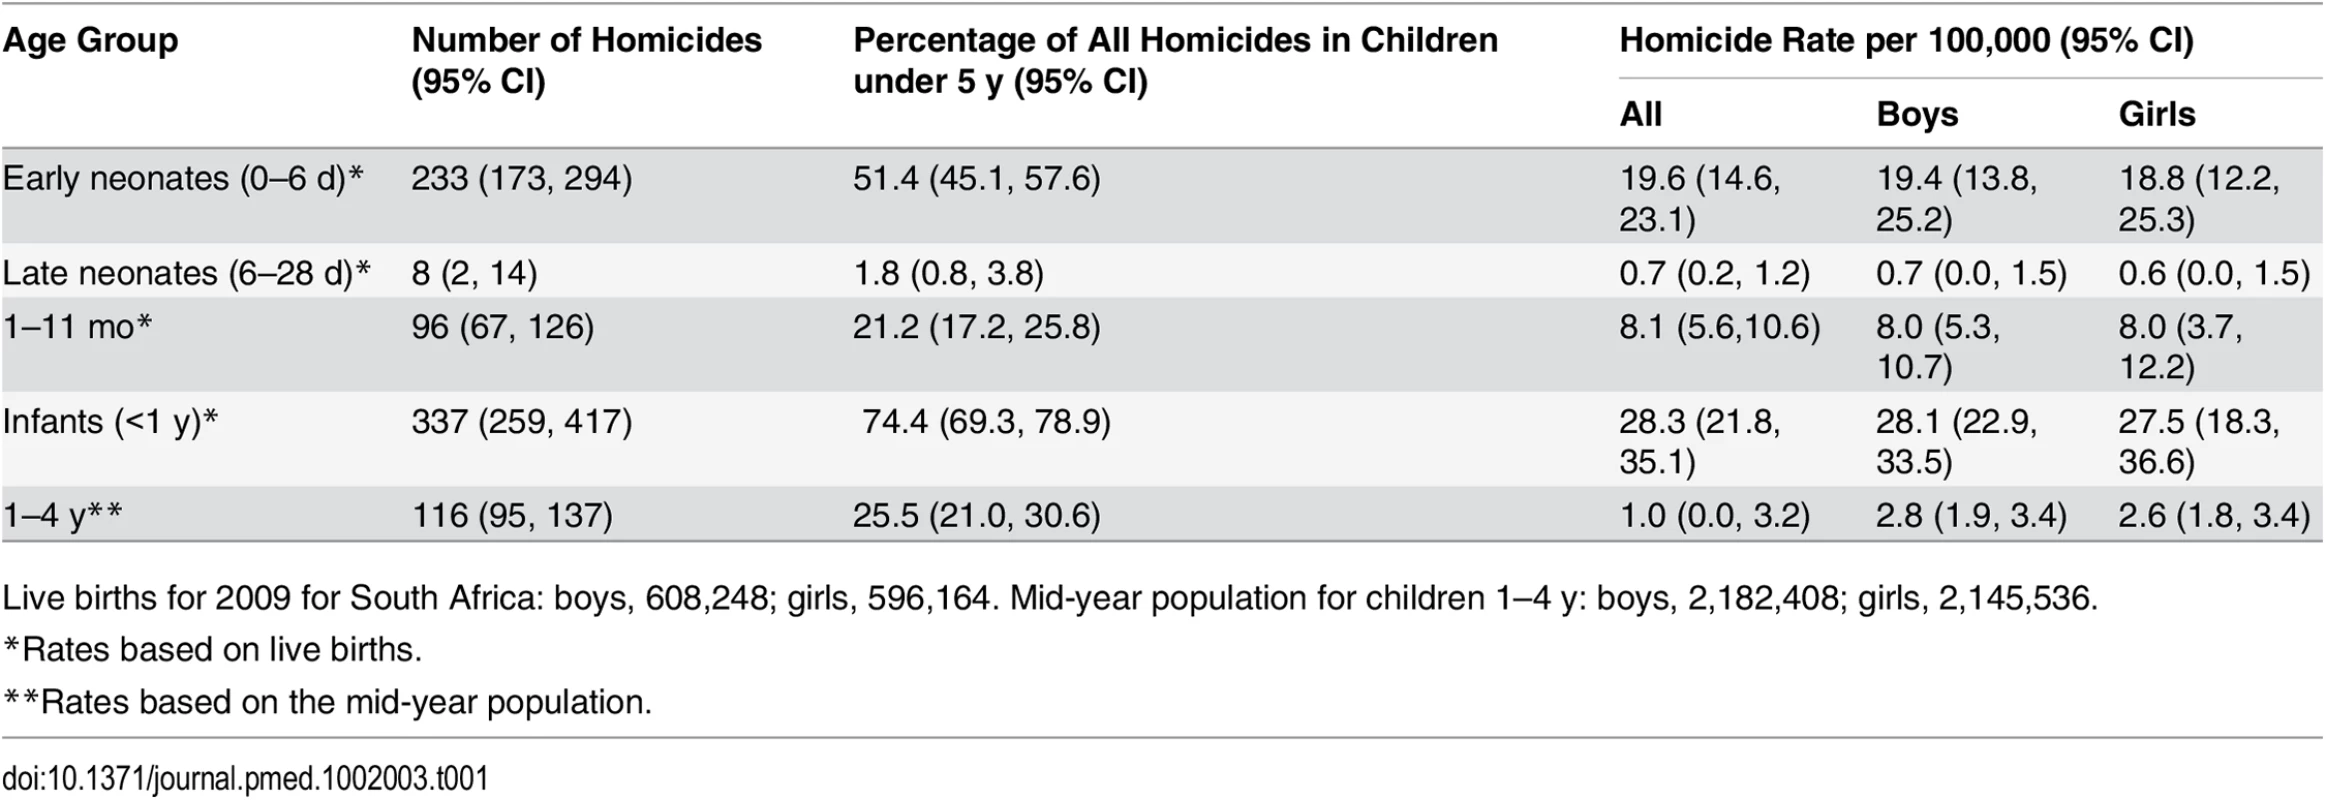 Estimated age-specific homicide rates per 100,000 live births for children under 5 y.